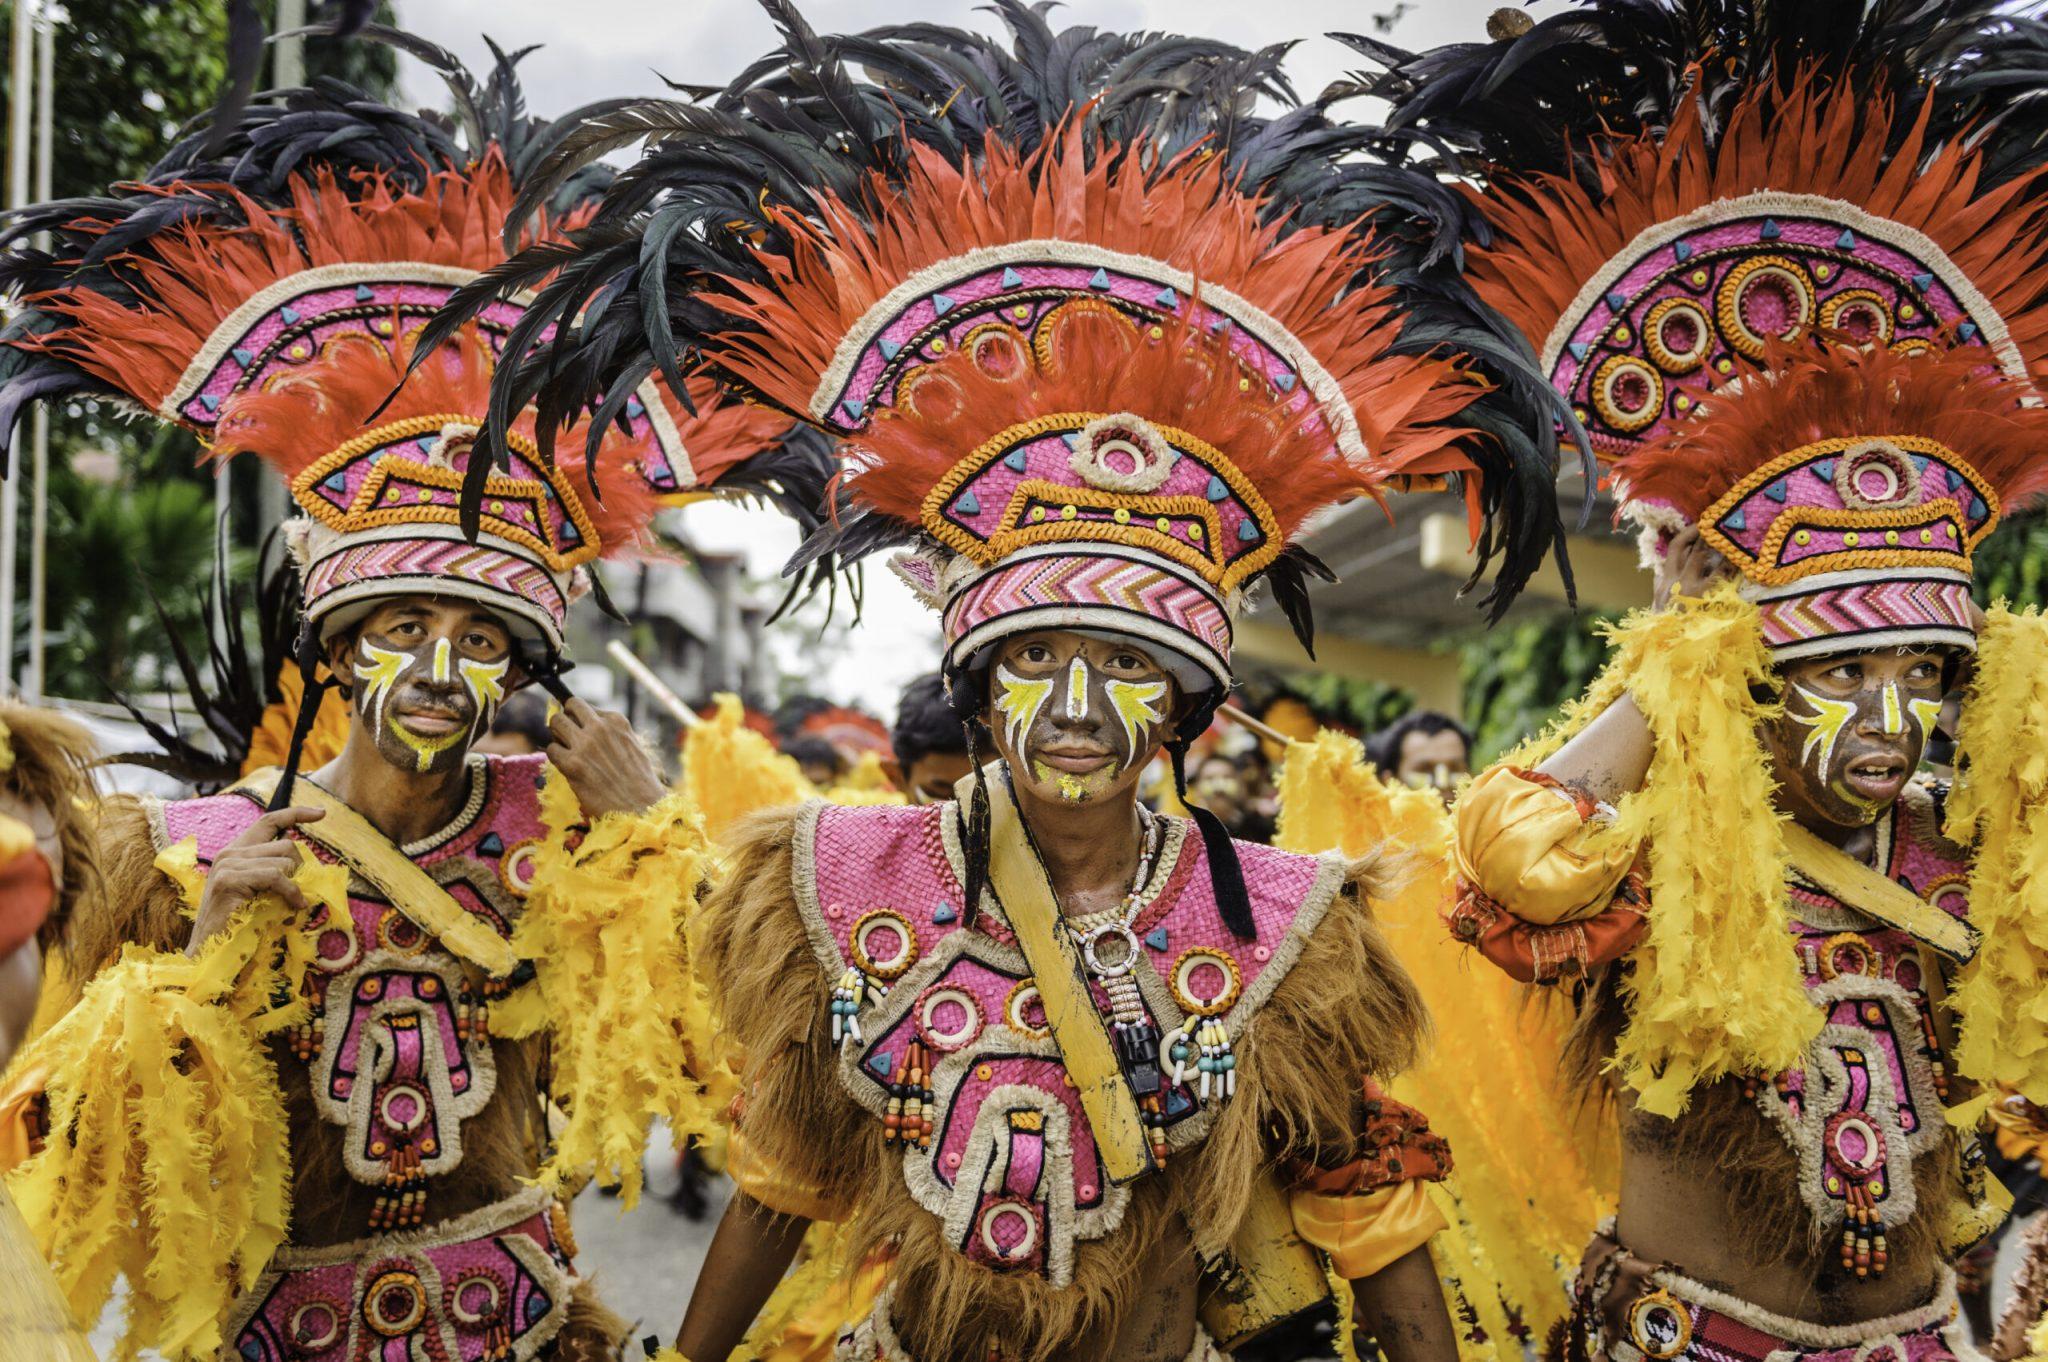 Participants of the parade during the celebration of Dinagyang in homage to “The Santo Niño”, Iloilo, Philippines. Photo and story credits by Jorge Fernandez Garces.